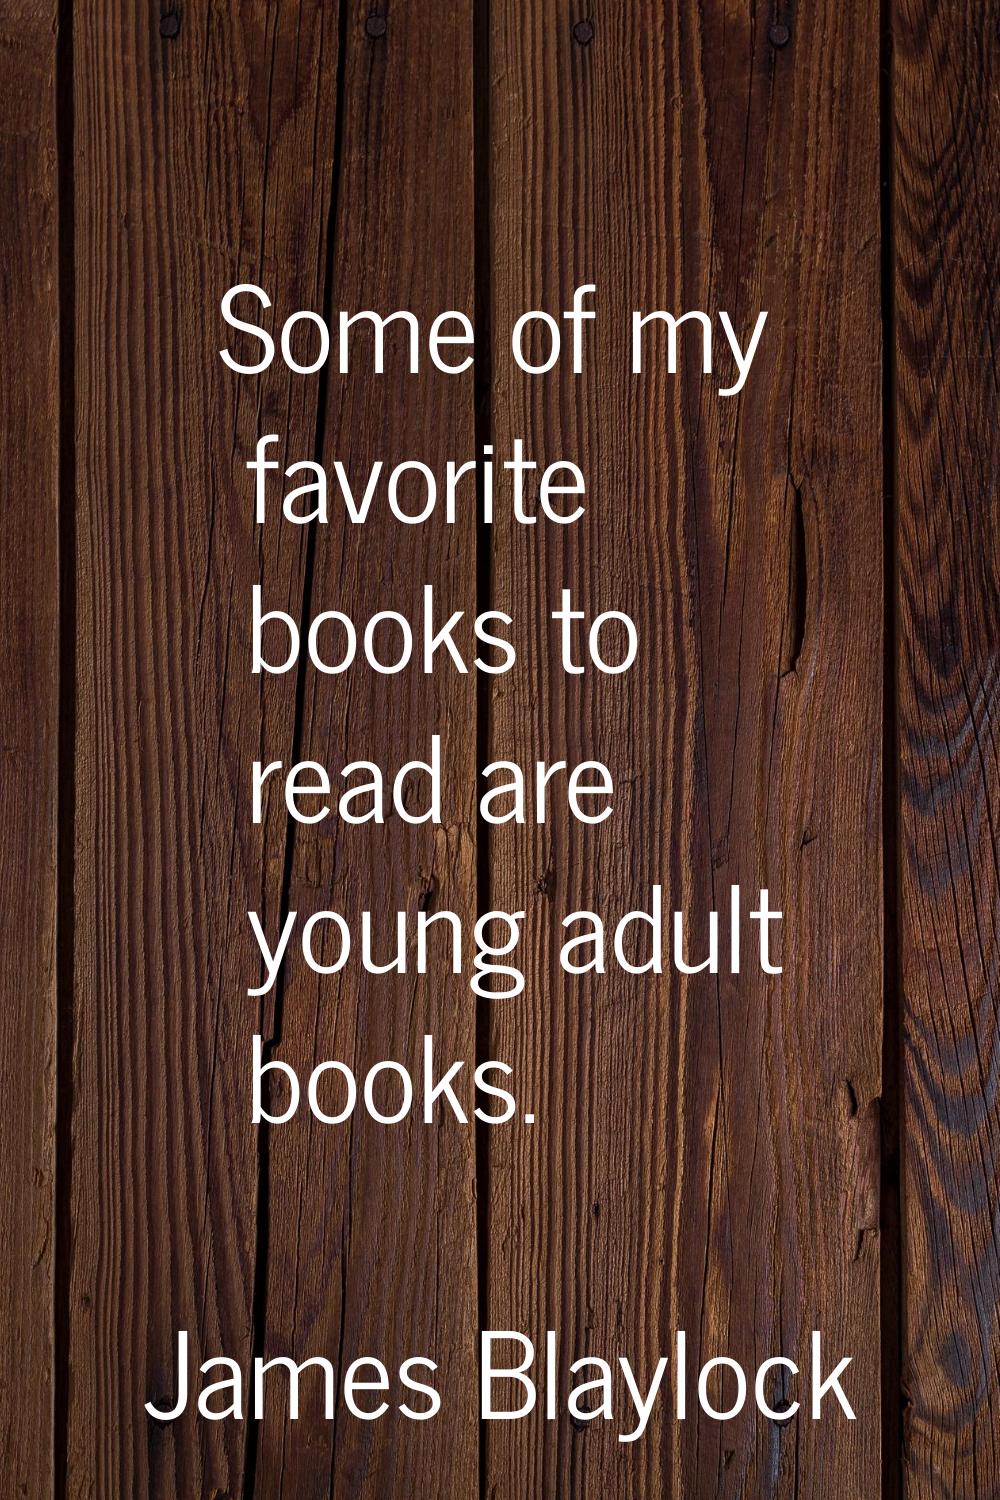 Some of my favorite books to read are young adult books.